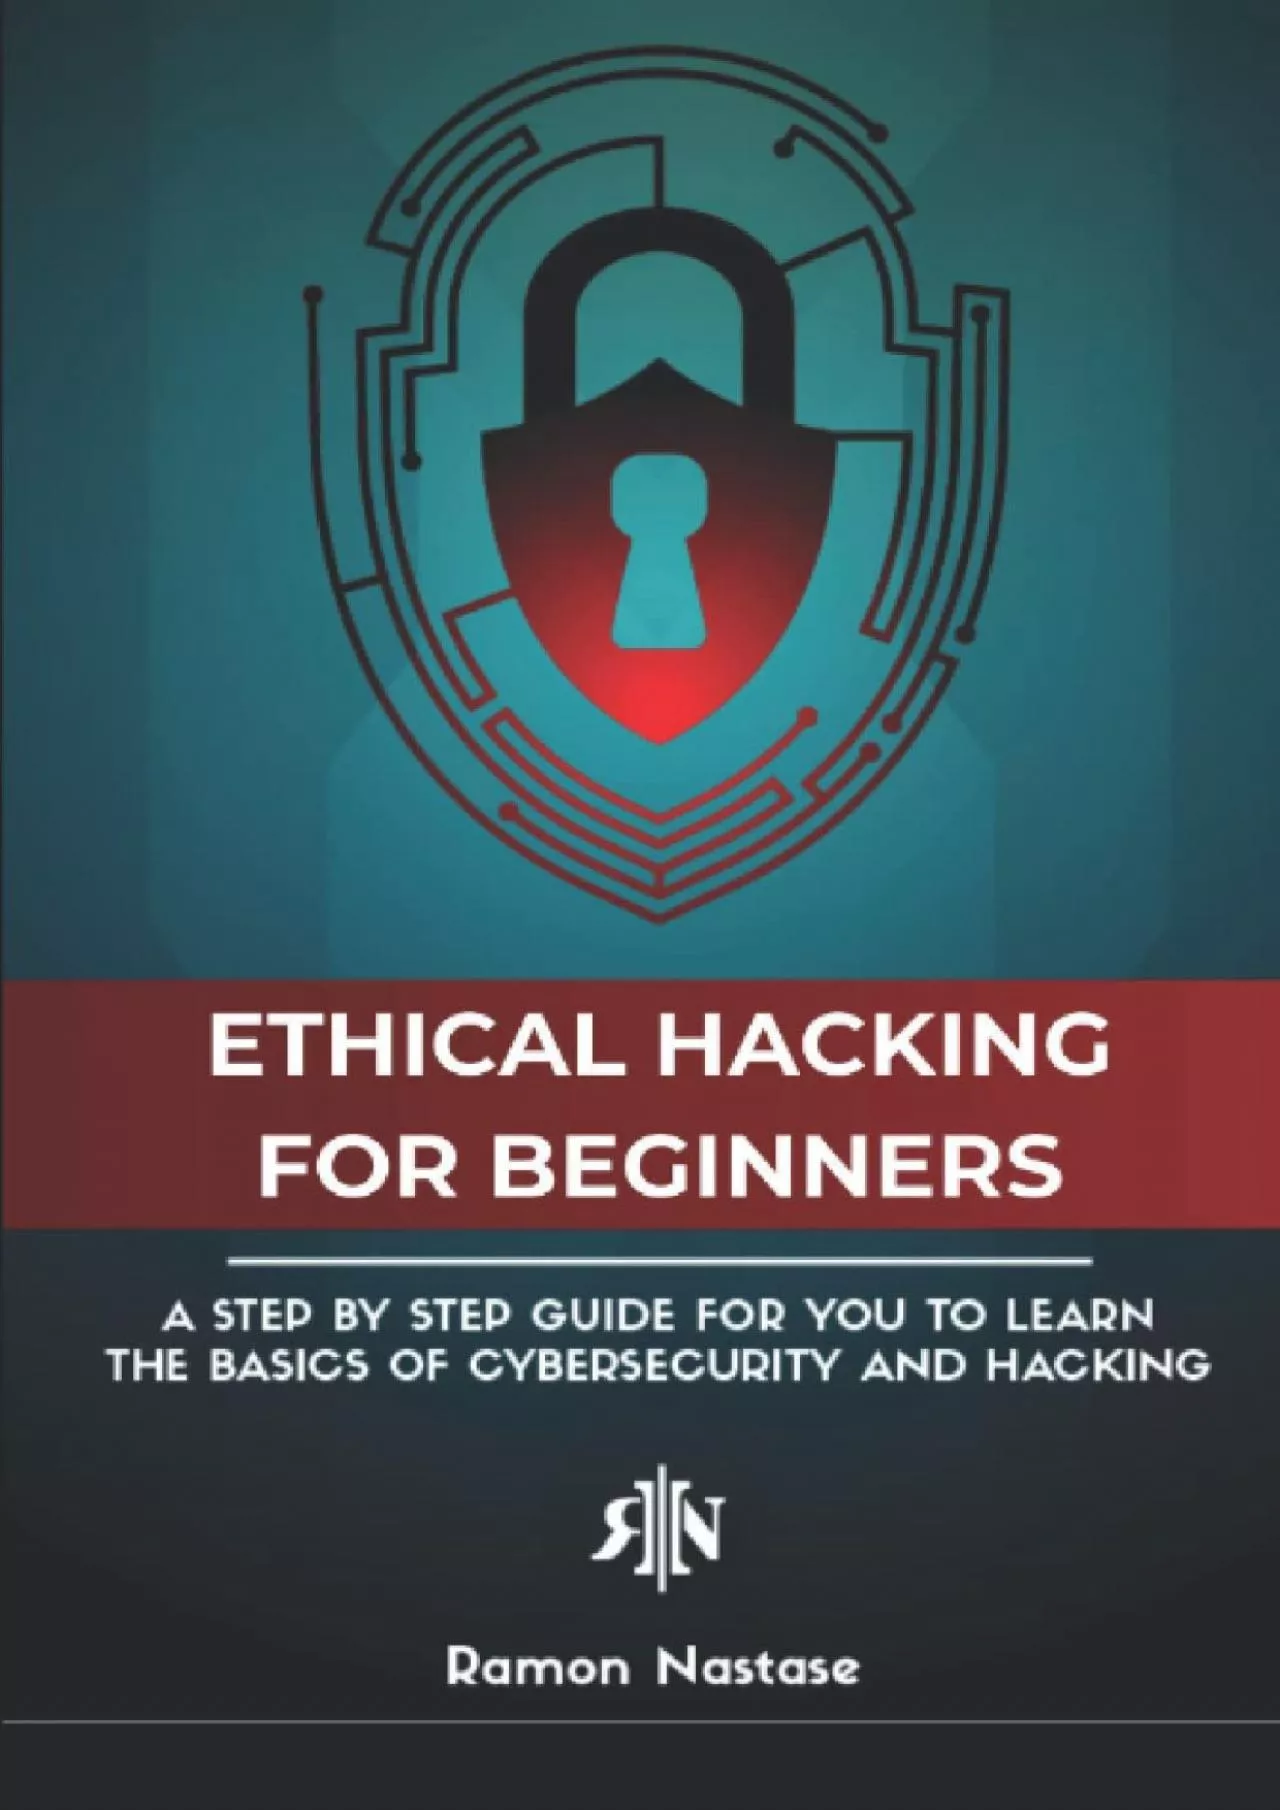 (BOOS)-The Ethical Hacking Book for Beginners: A Step by Step Guide for you to Learn the